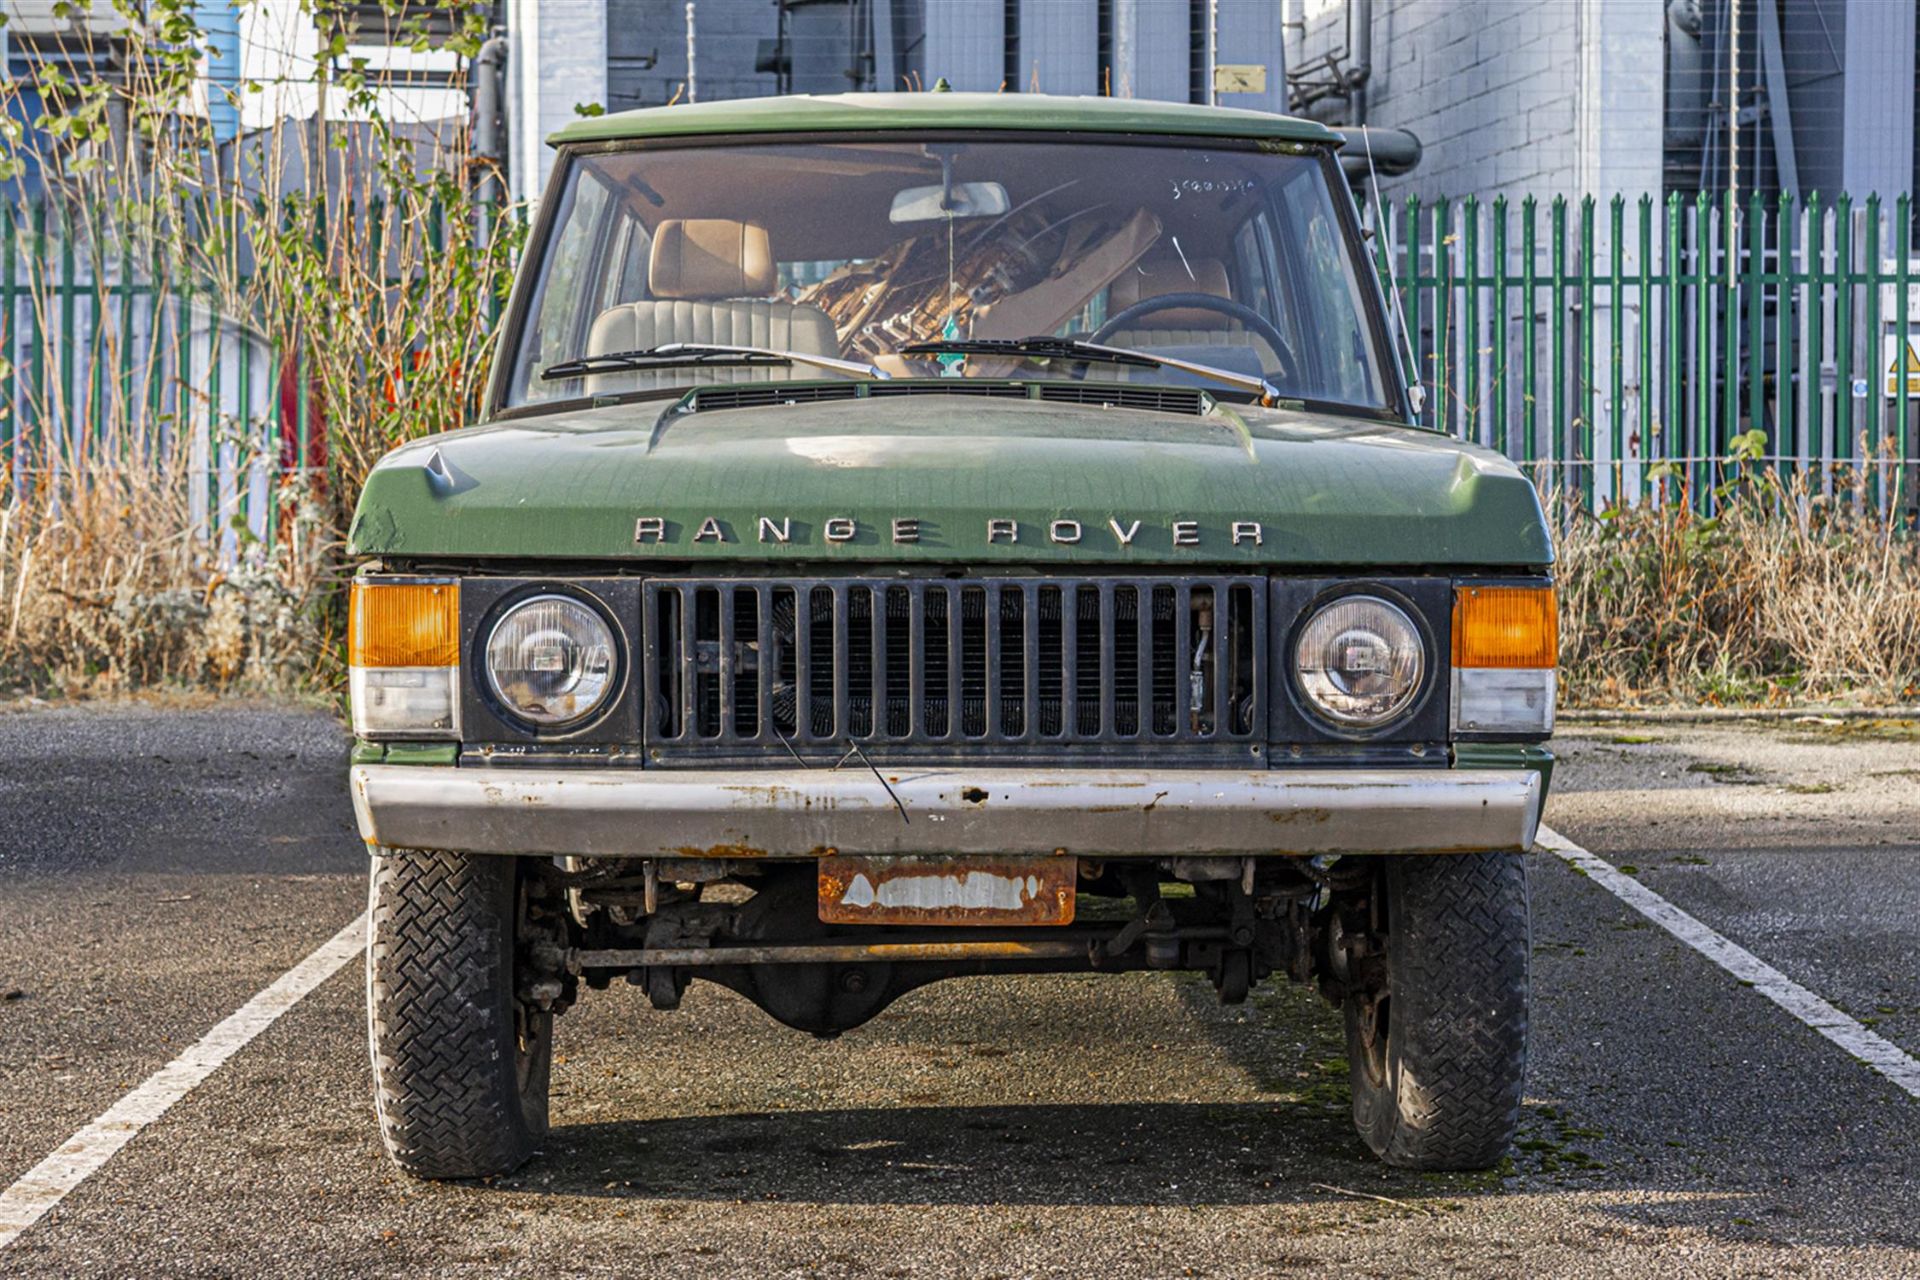 1972 Range Rover Classic 'Suffix A' - Image 3 of 5